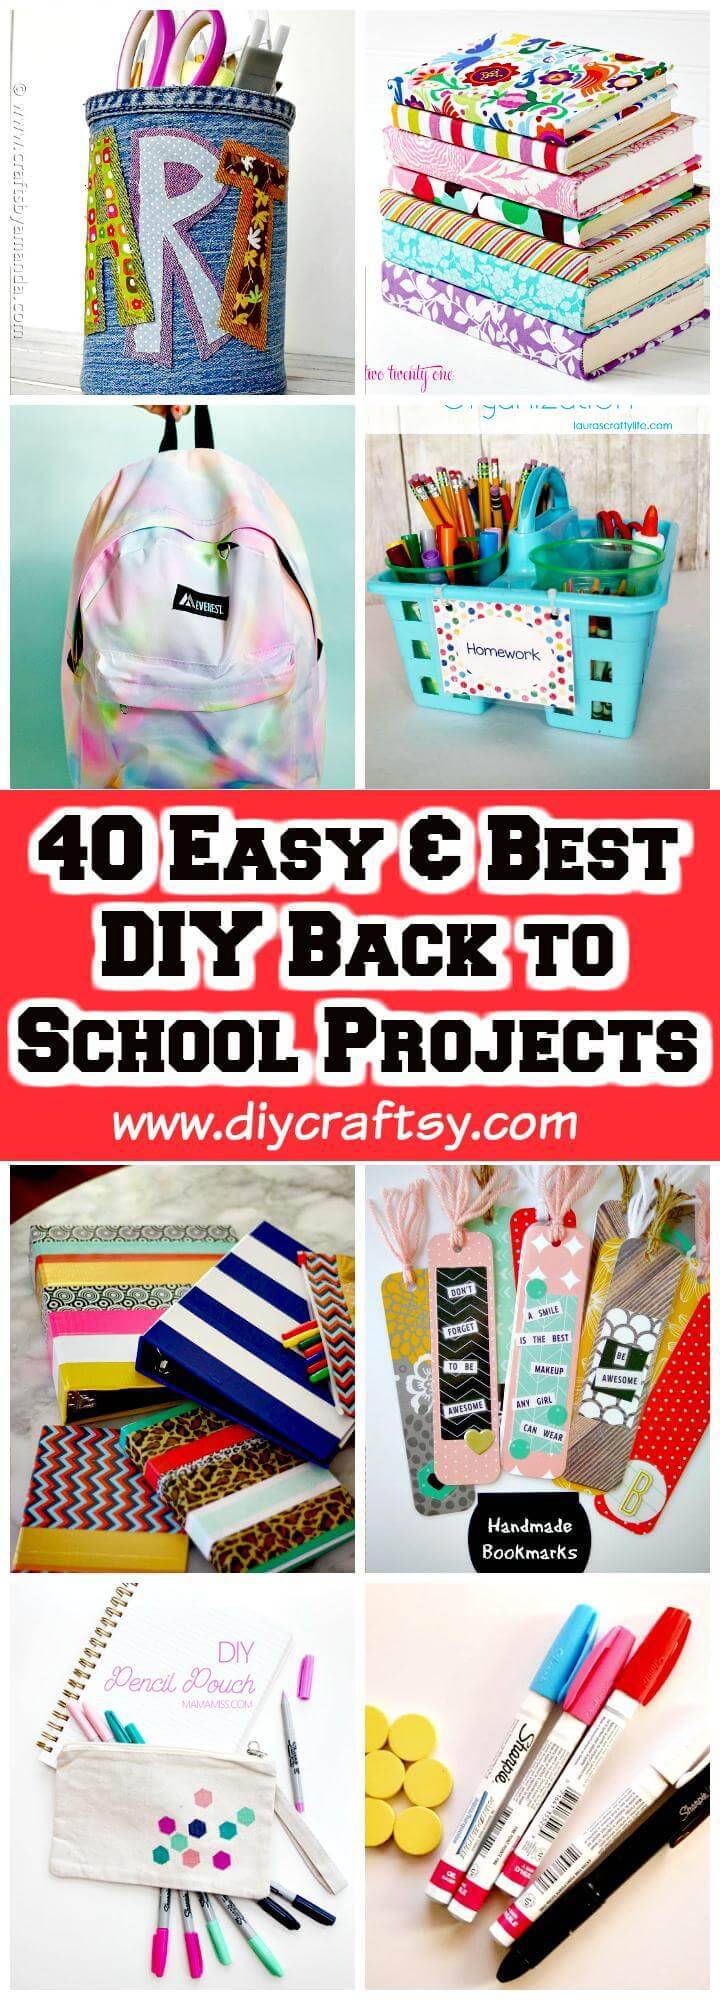 DIY Back to School Projects